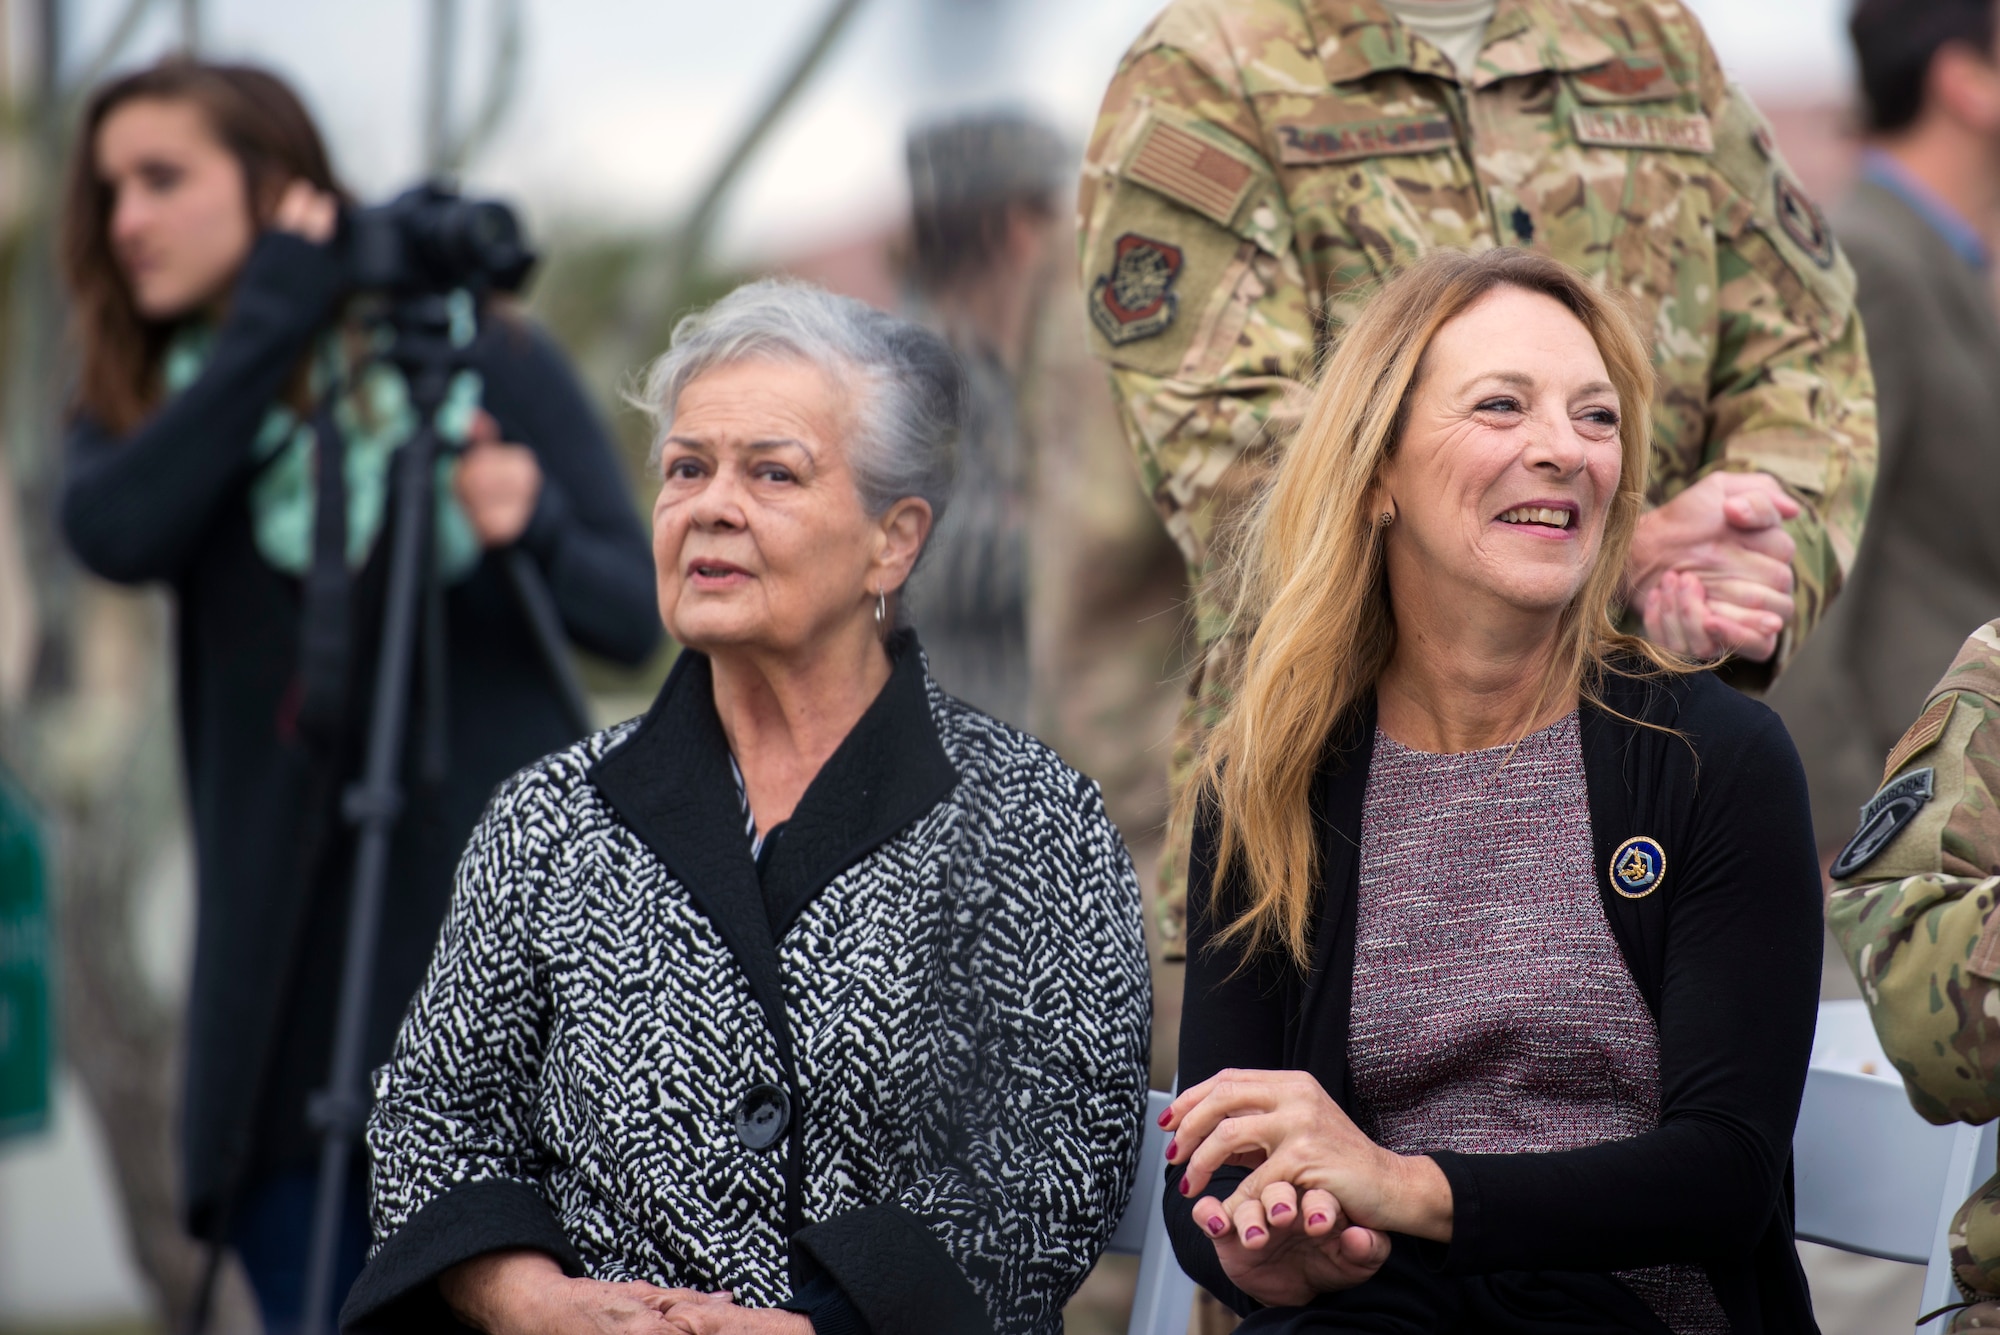 The family of U.S. Air Force Master Sgt. John Chapman, a Congressional Medal of Honor recipient, attends his ceremony at MacDill Air Force Base, Fla., Jan. 30, 2019.